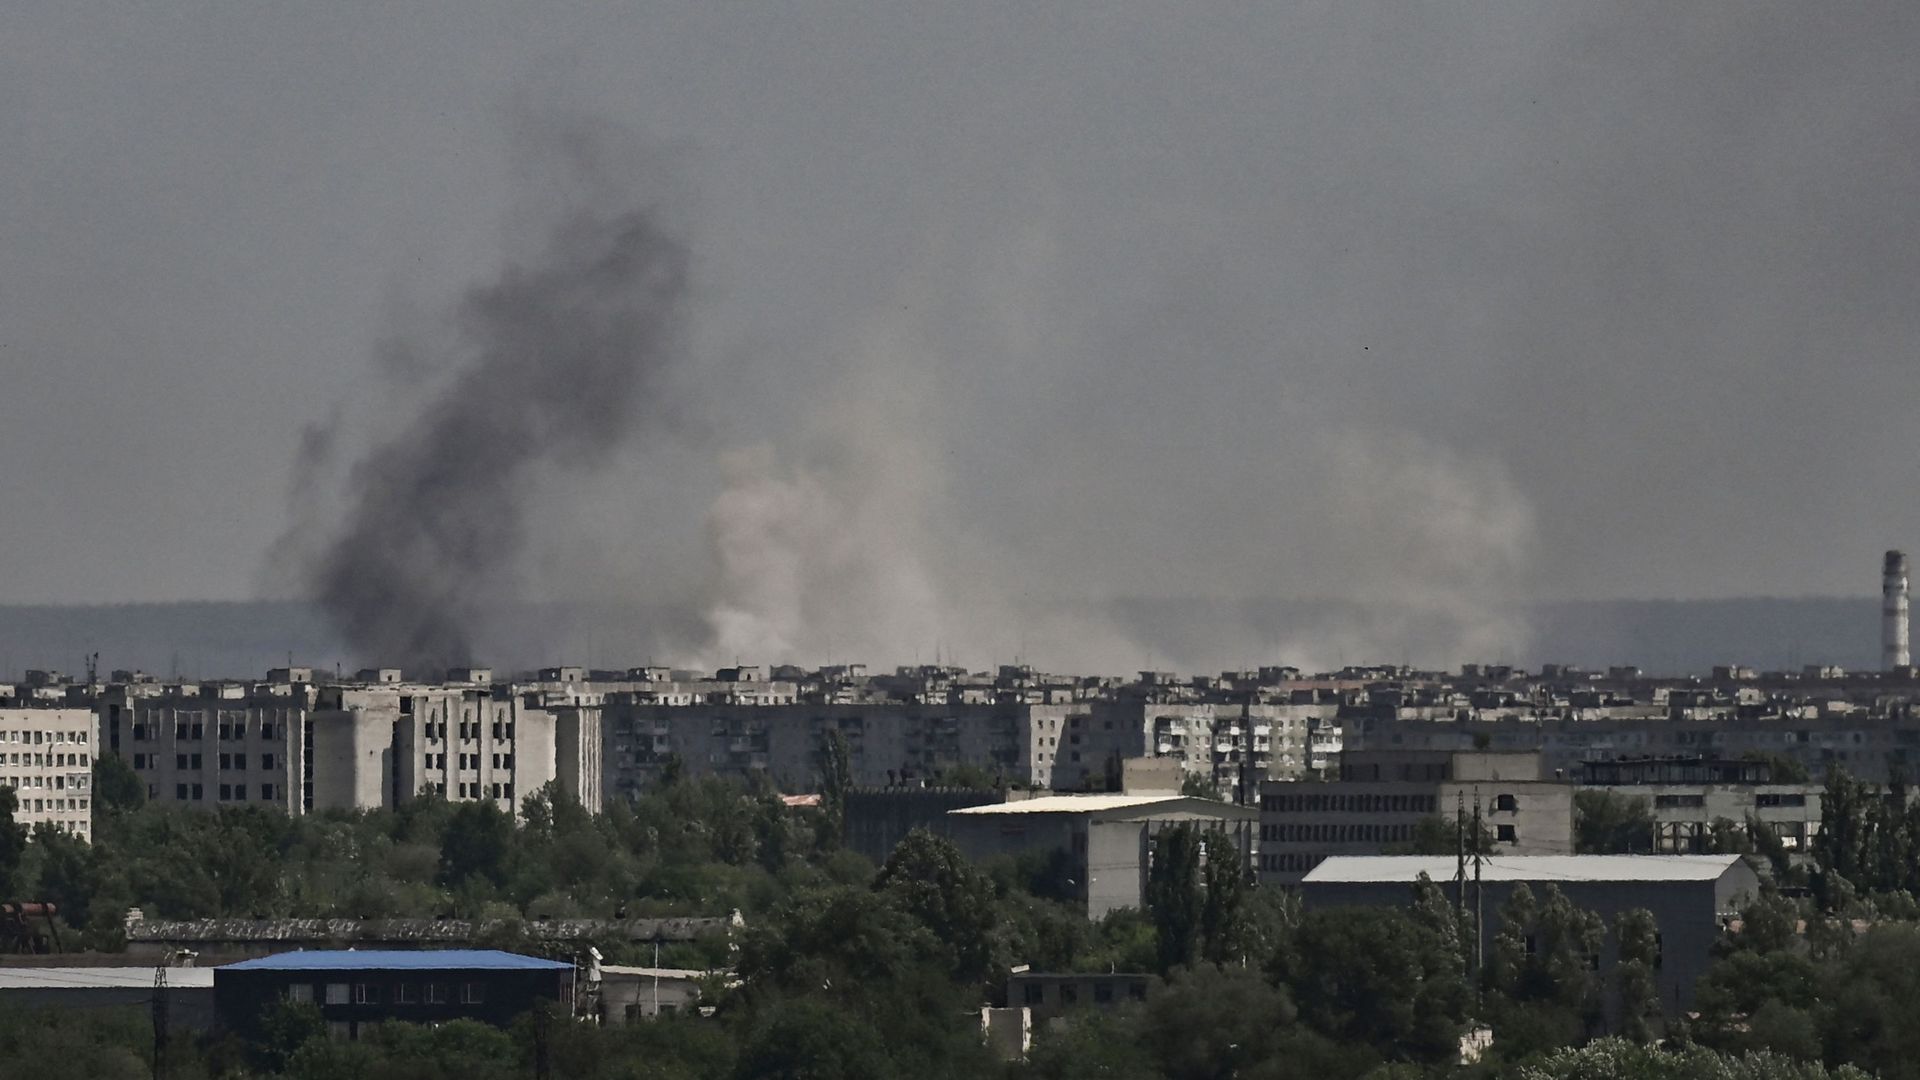  Smoke and dirt rise from the city of Severodonetsk, during shelling in the eastern Ukrainian region of Donbas, on May 26.